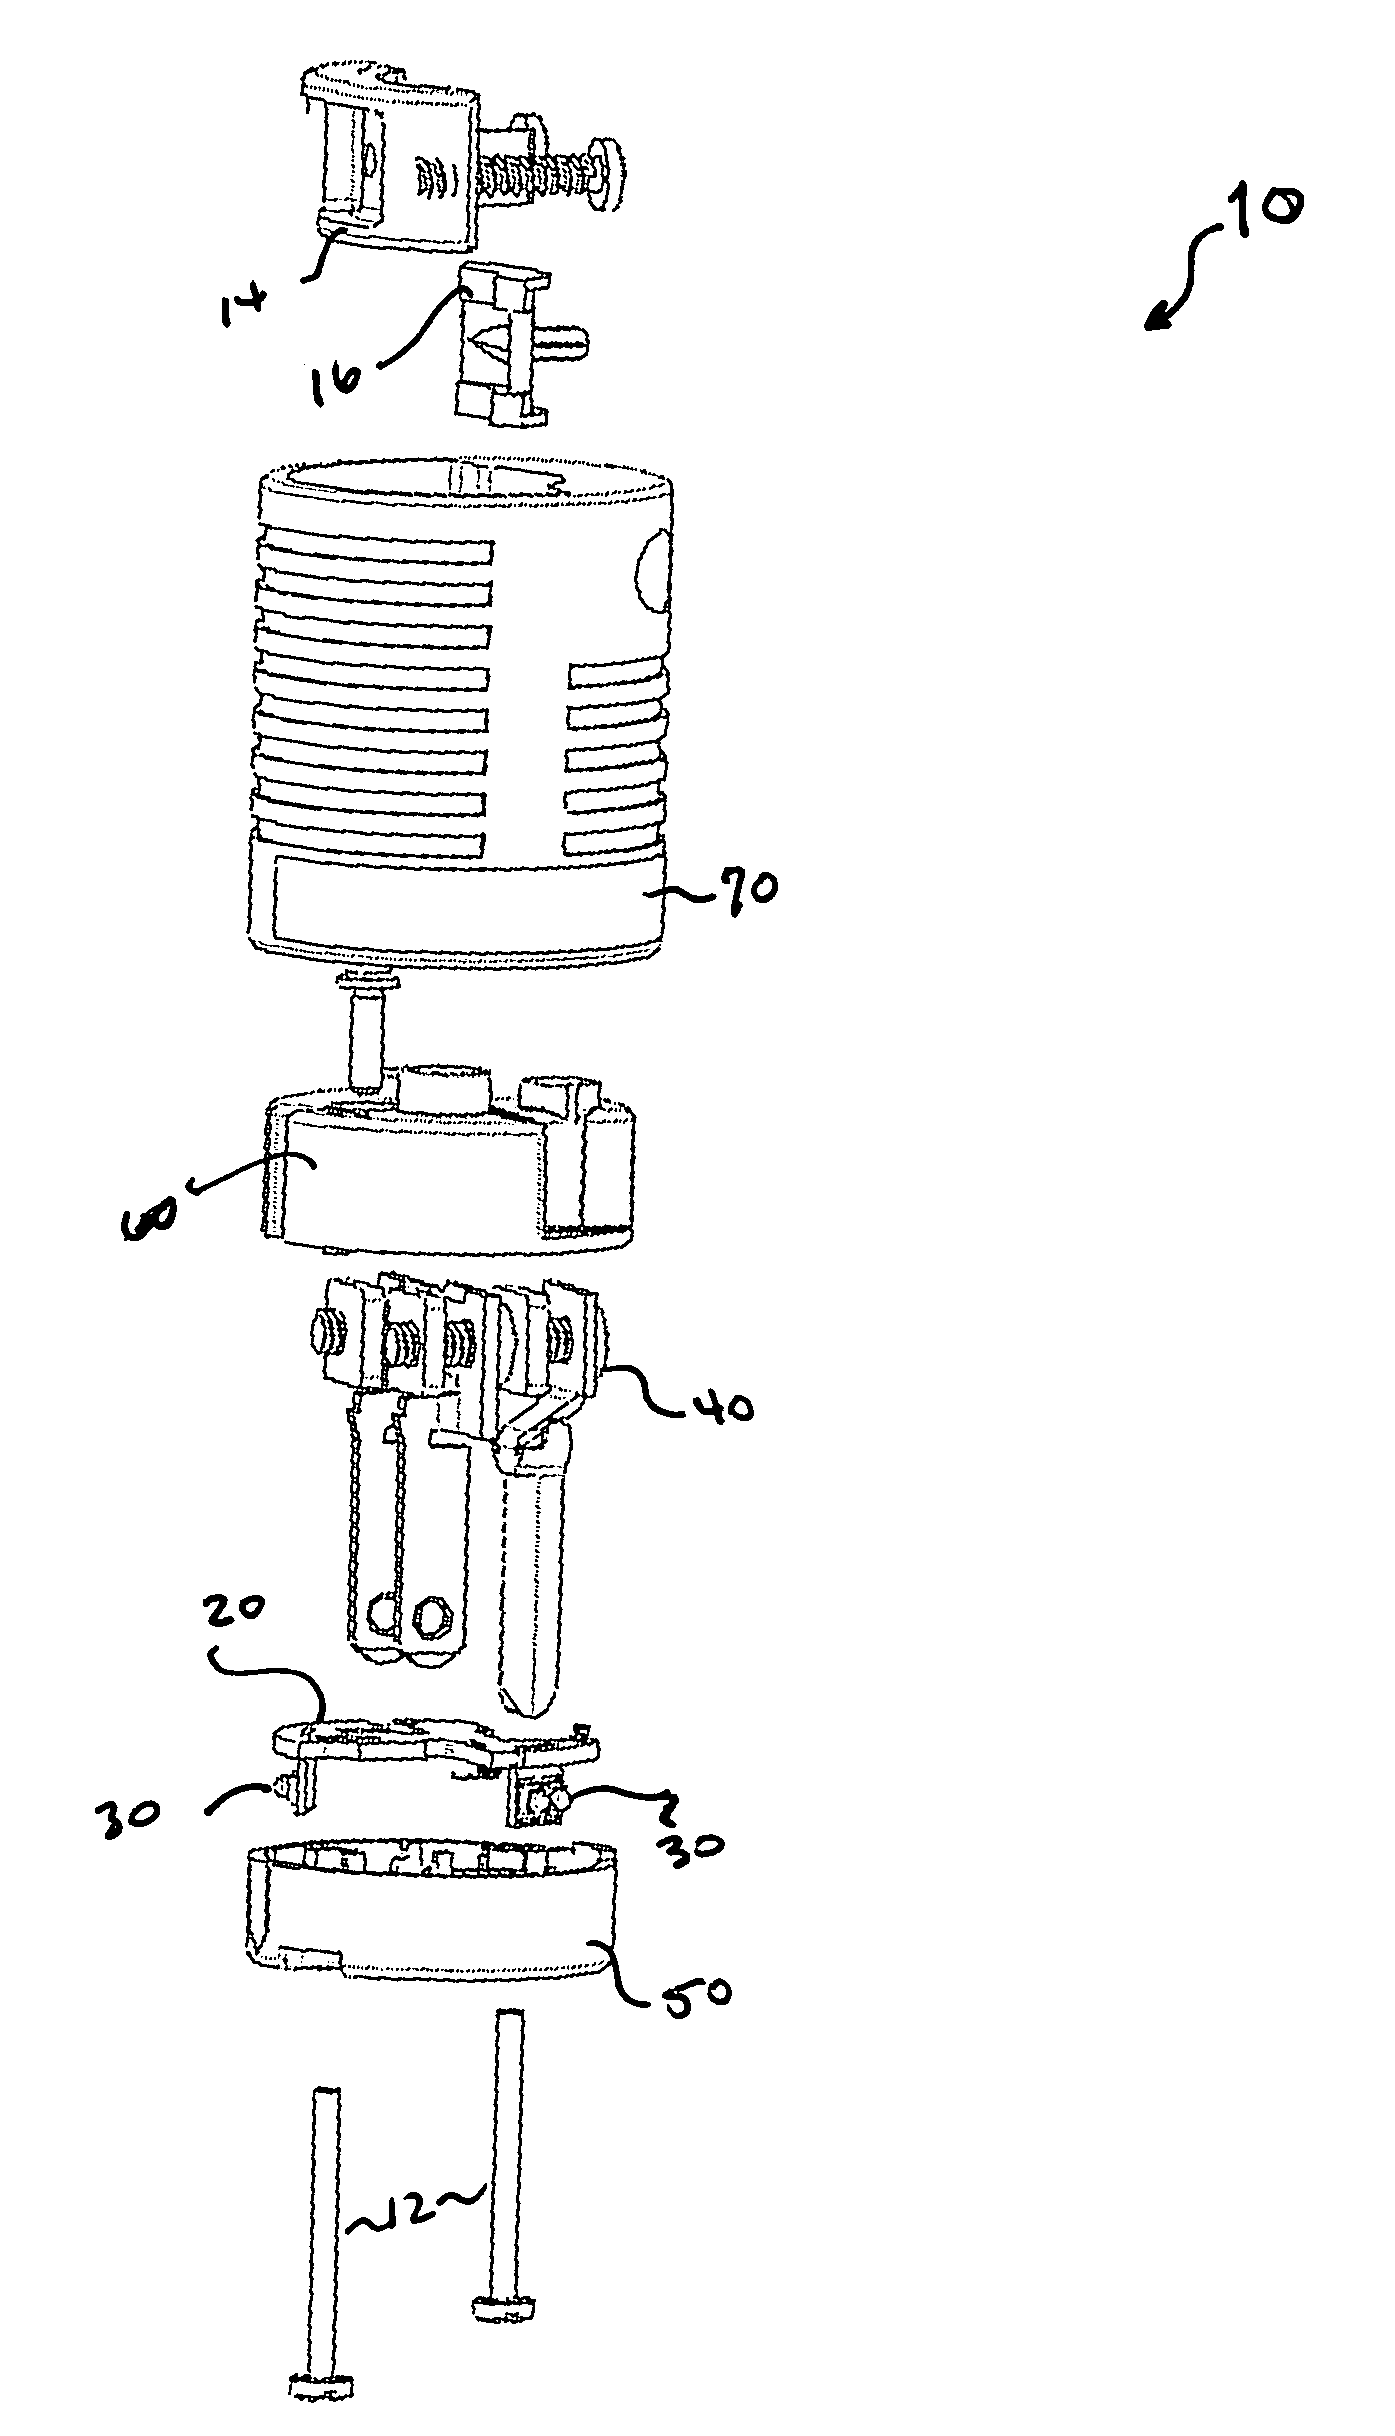 Electric circuit test device